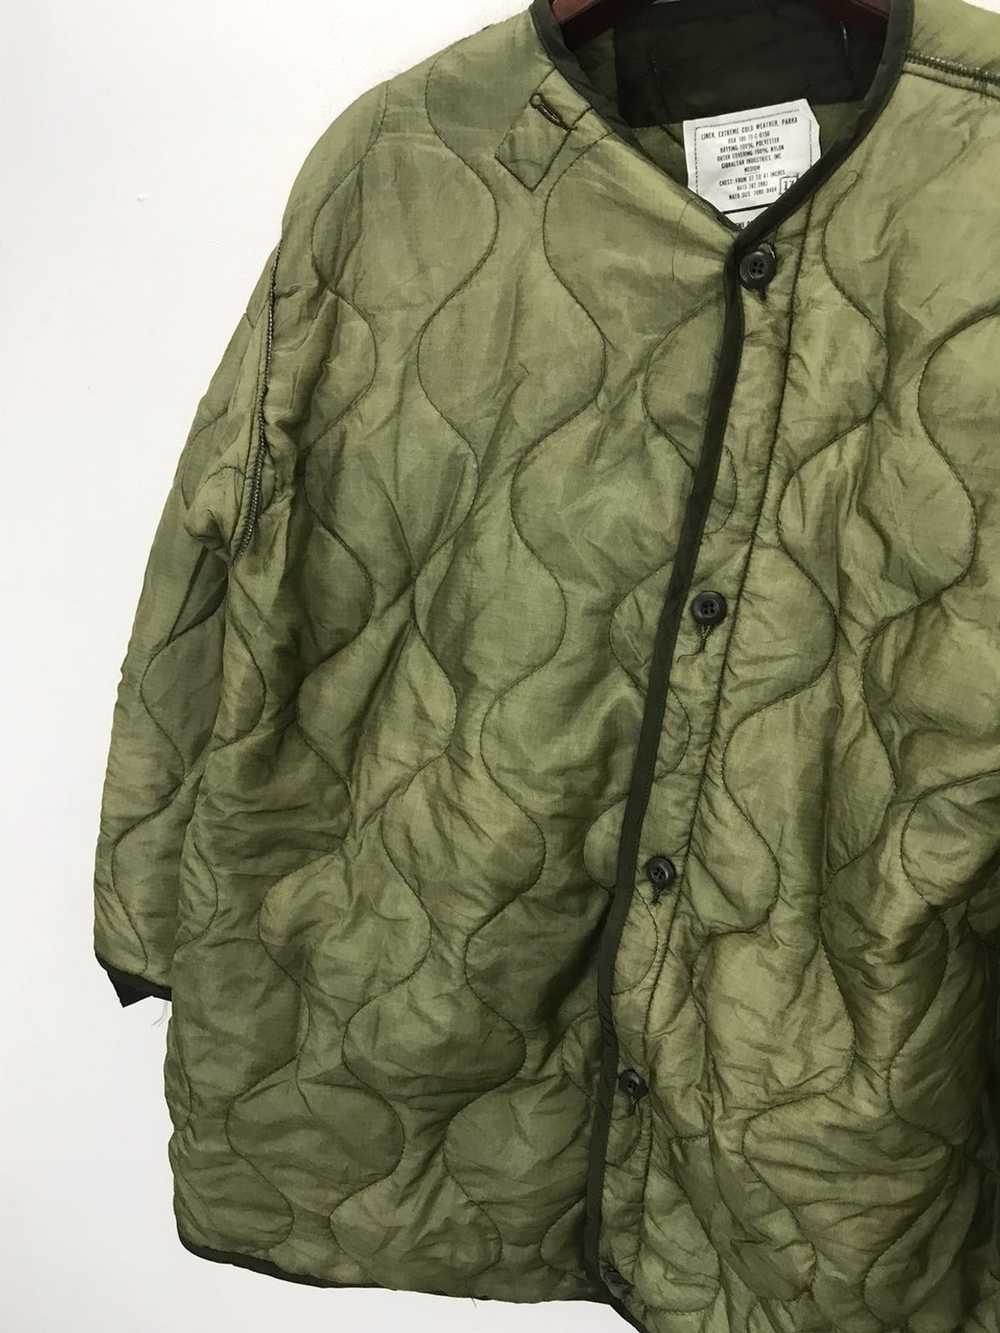 Military × Vintage Vintage Quilted lining inner m… - image 5